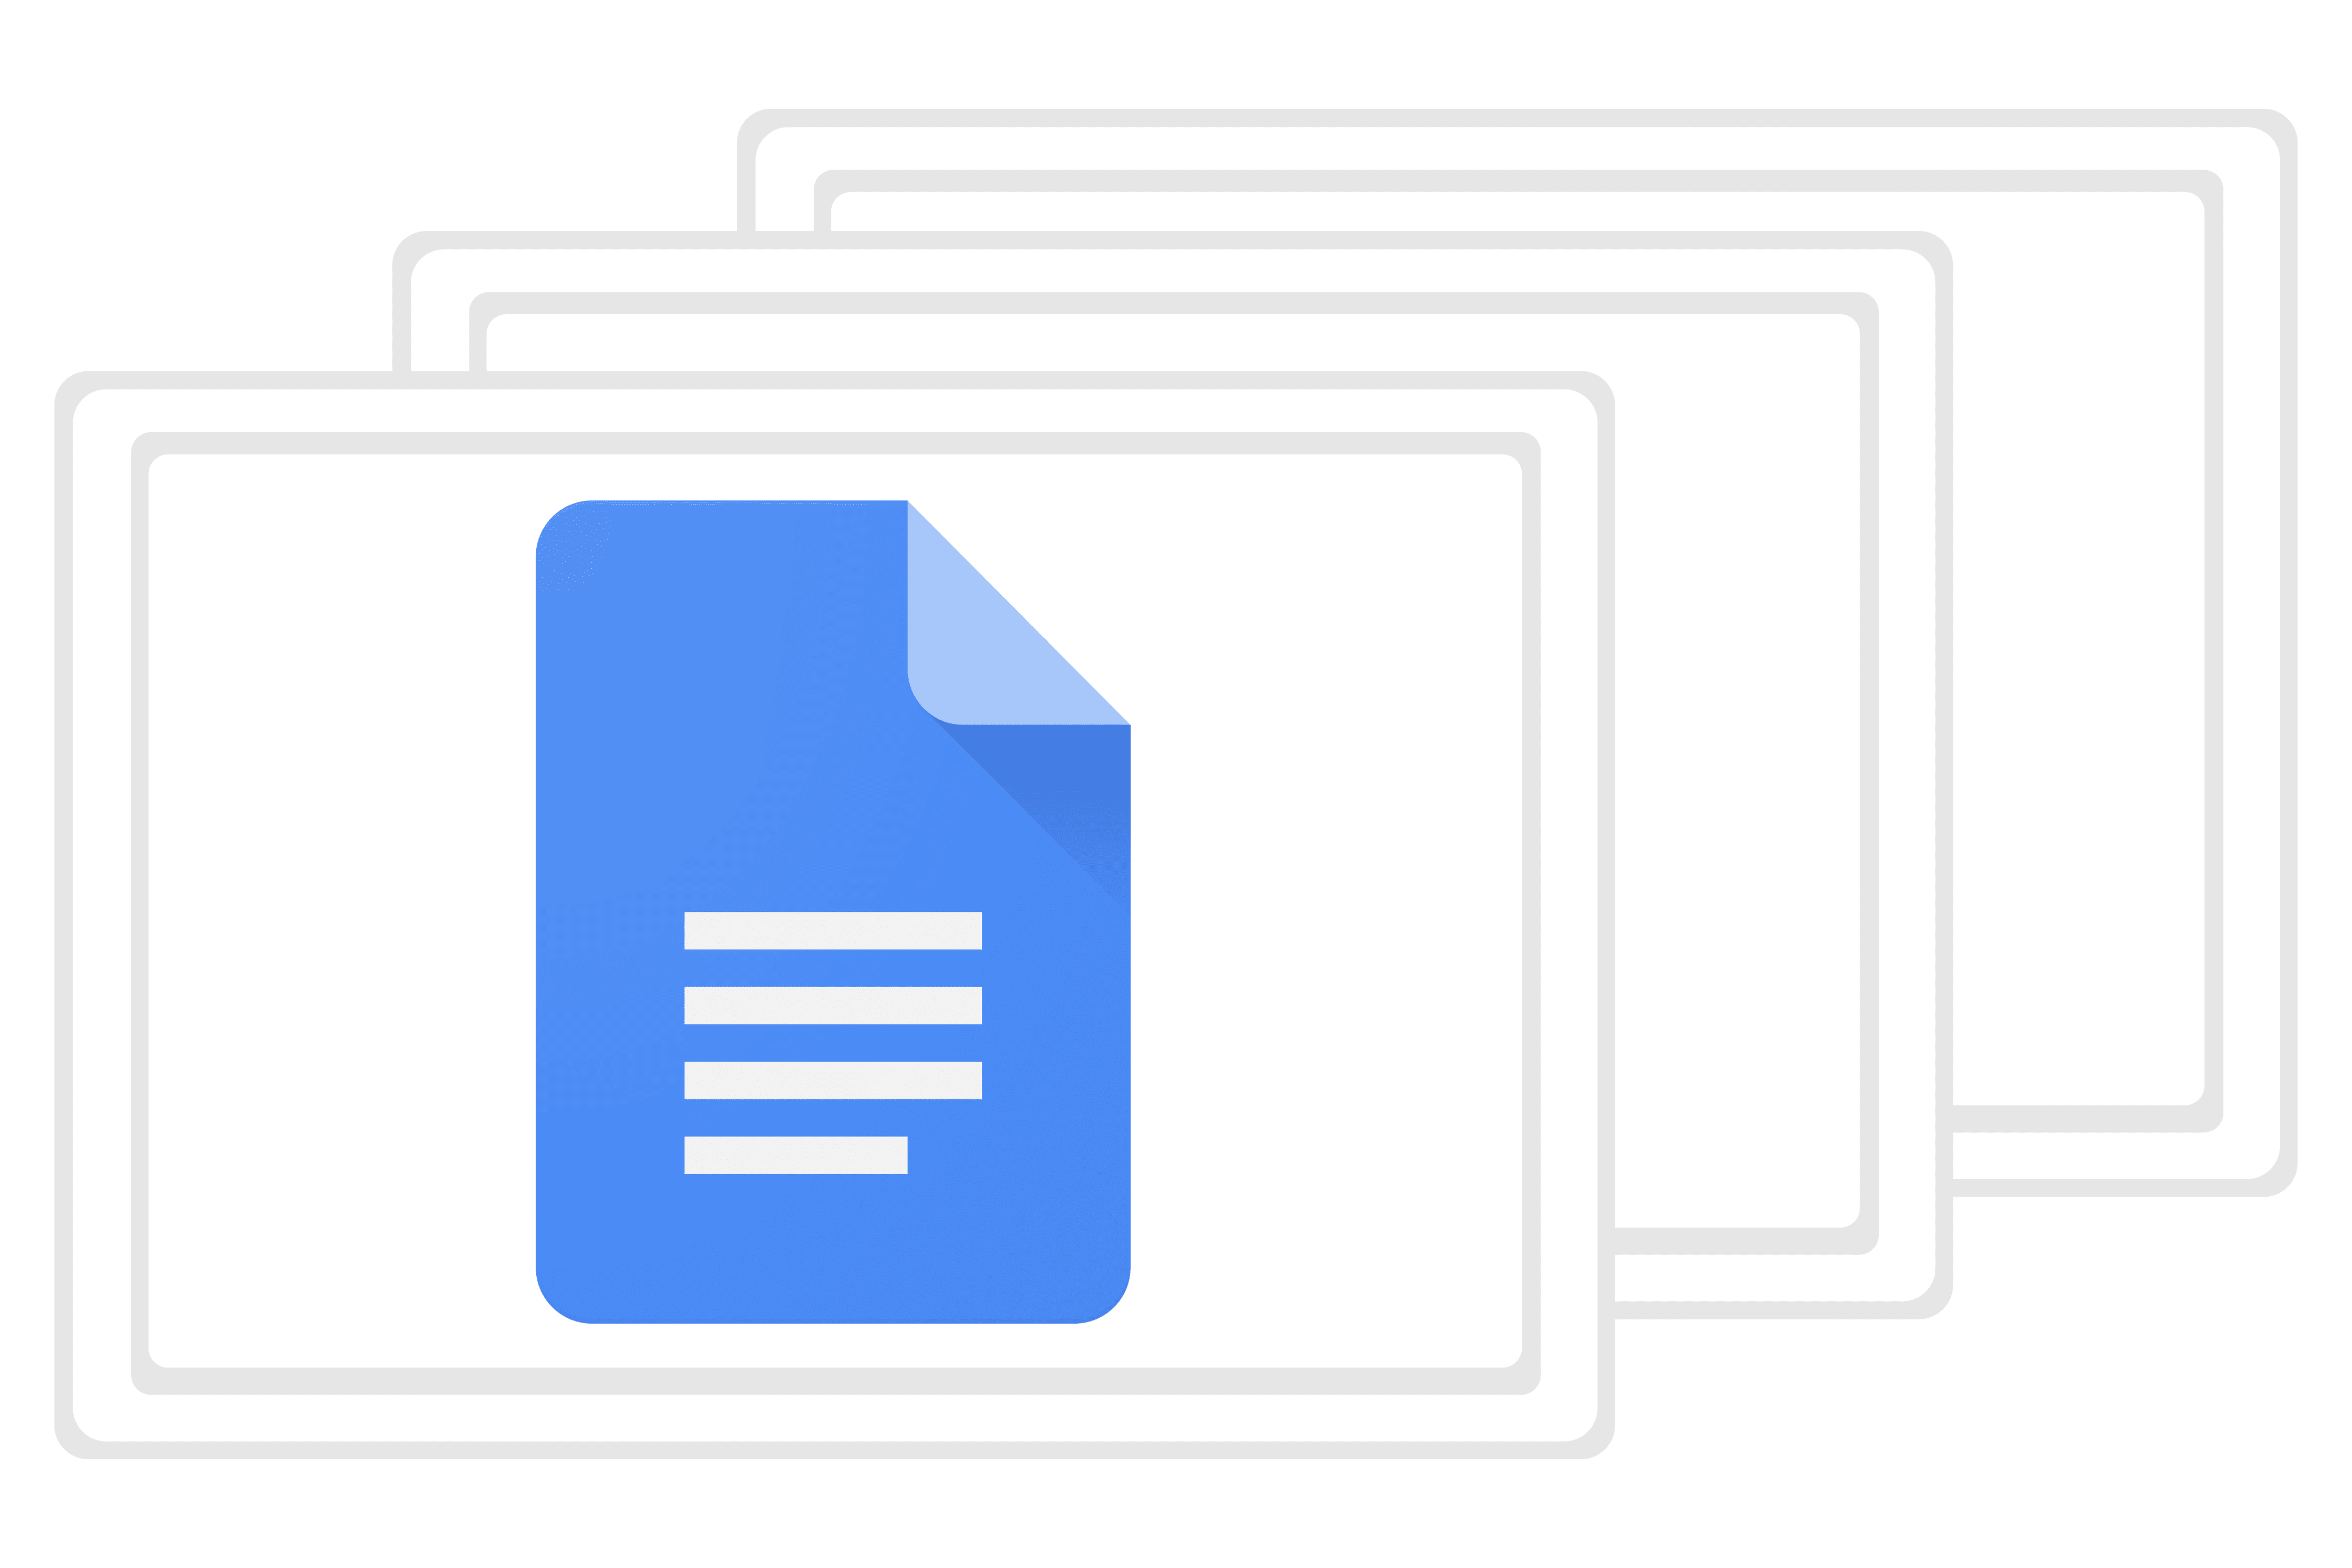 How To Save An Image From Google Docs